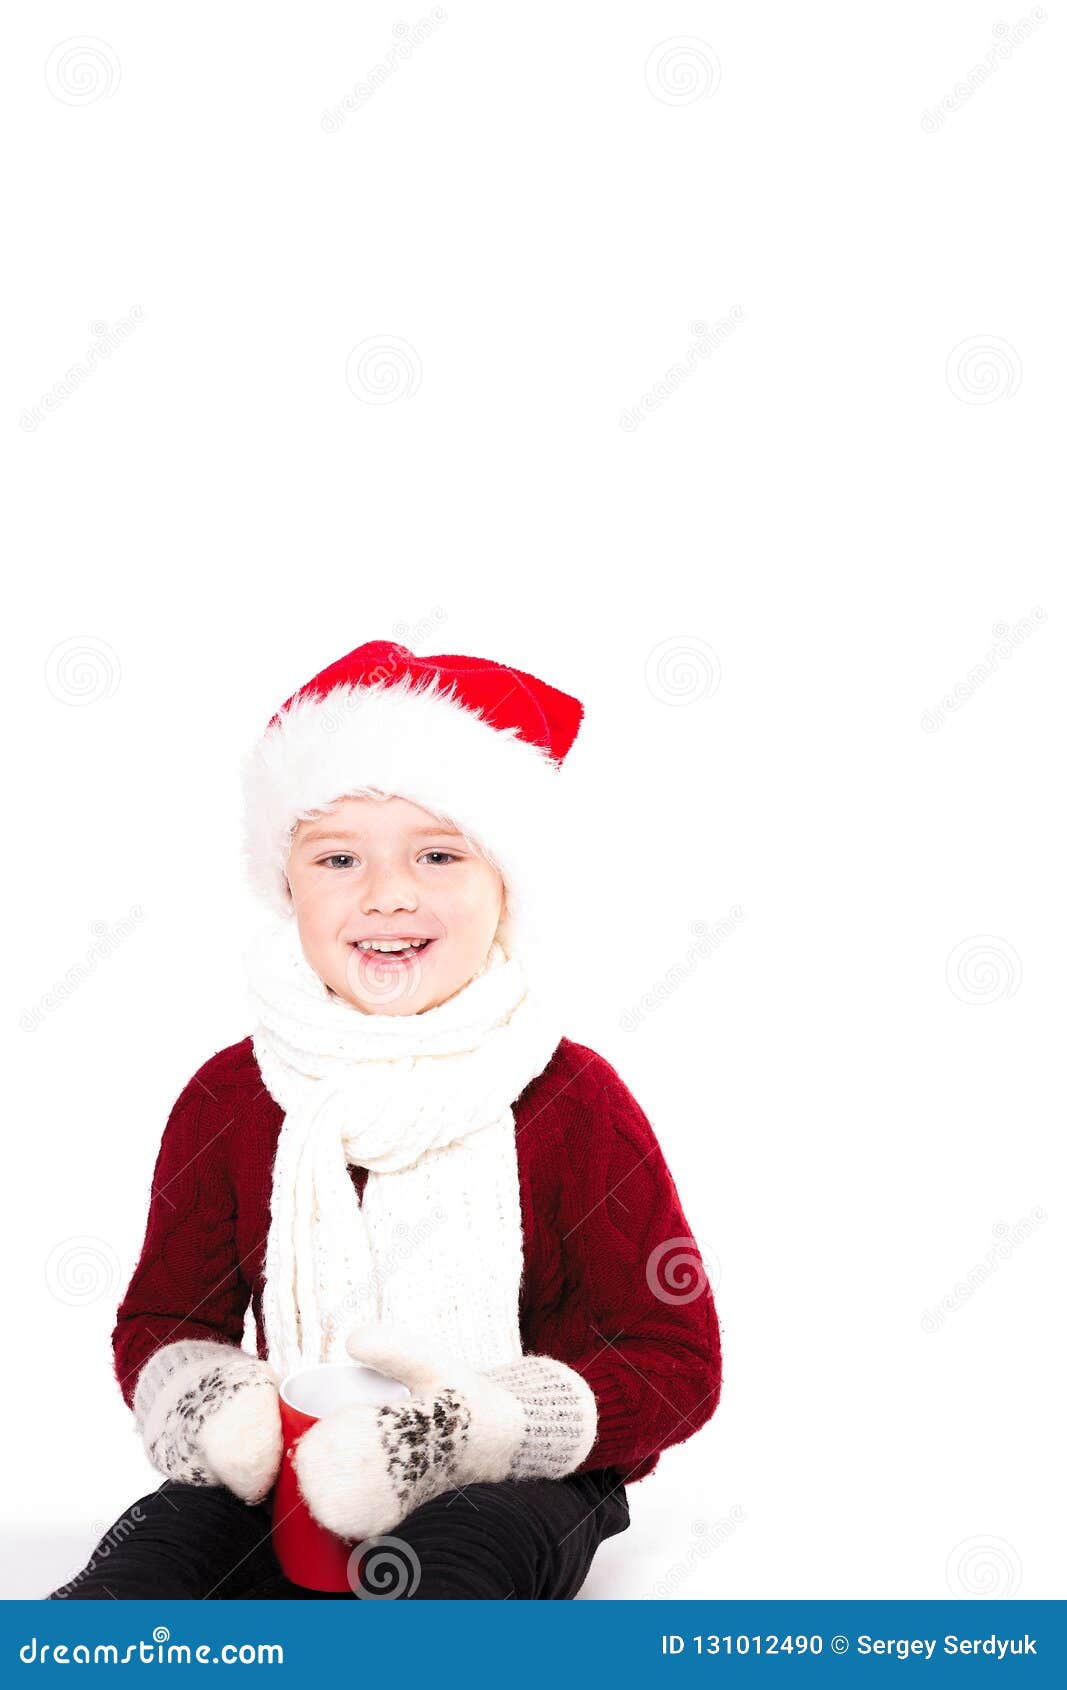 https://thumbs.dreamstime.com/z/merry-christmas-happy-new-year-cute-little-boy-holdin-holding-red-cup-kid-enjoy-holiday-santa-hat-portrait-light-background-131012490.jpg